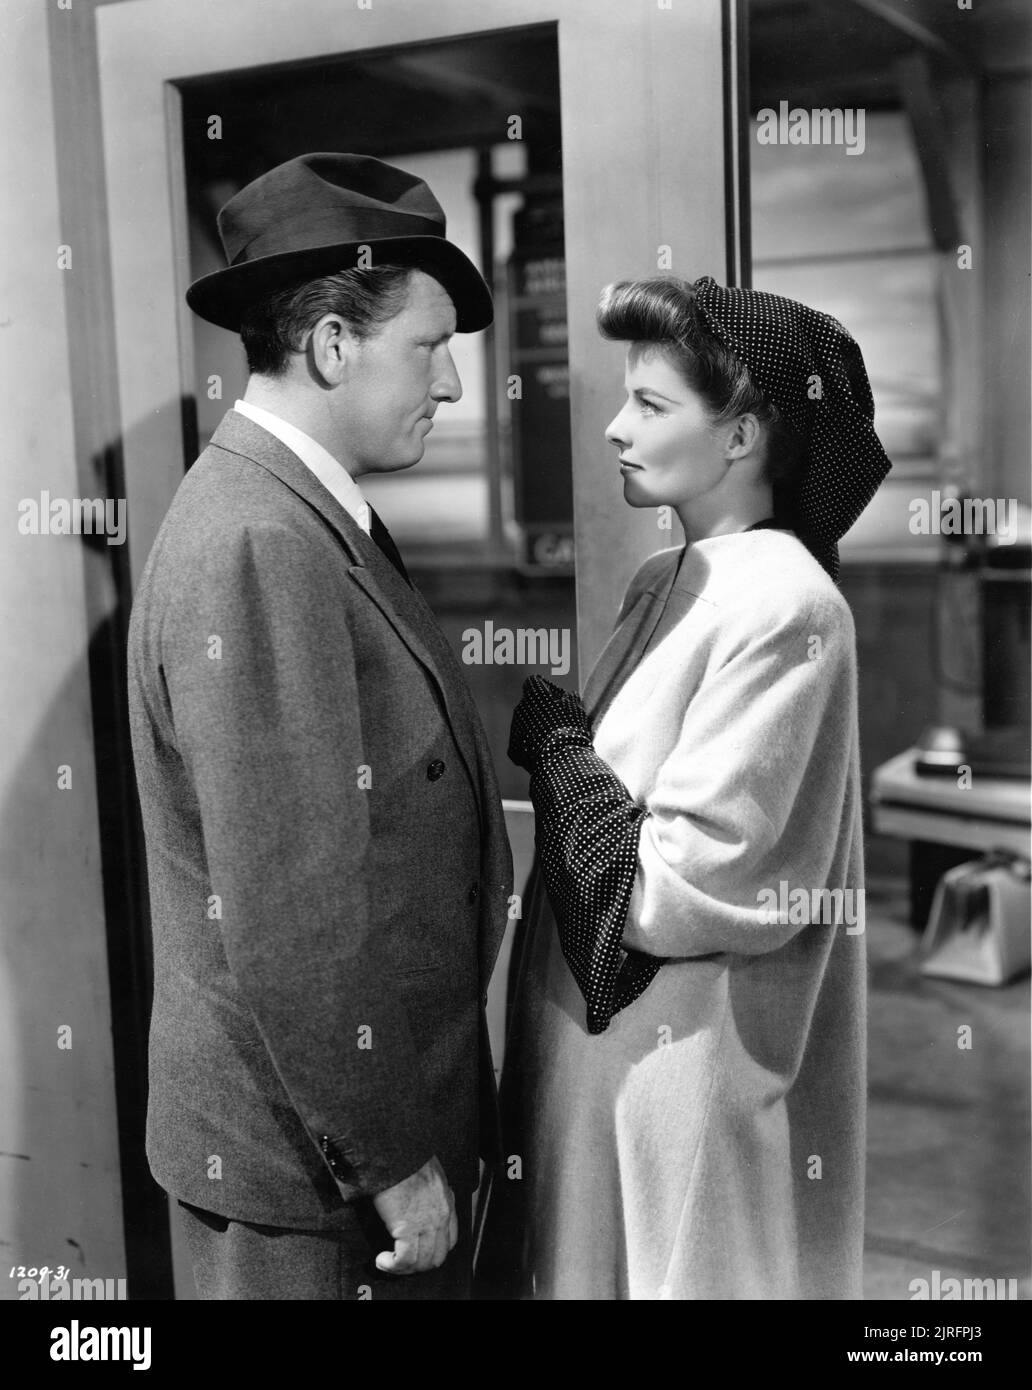 SPENCER TRACY and KATHARINE HEPBURN in WOMAN OF THE YEAR 1942 director GEORGE STEVENS gowns Gilbert Adrian music Franz Waxman producer Joseph L. Mankiewicz Metro Goldwyn Mayer Stock Photo